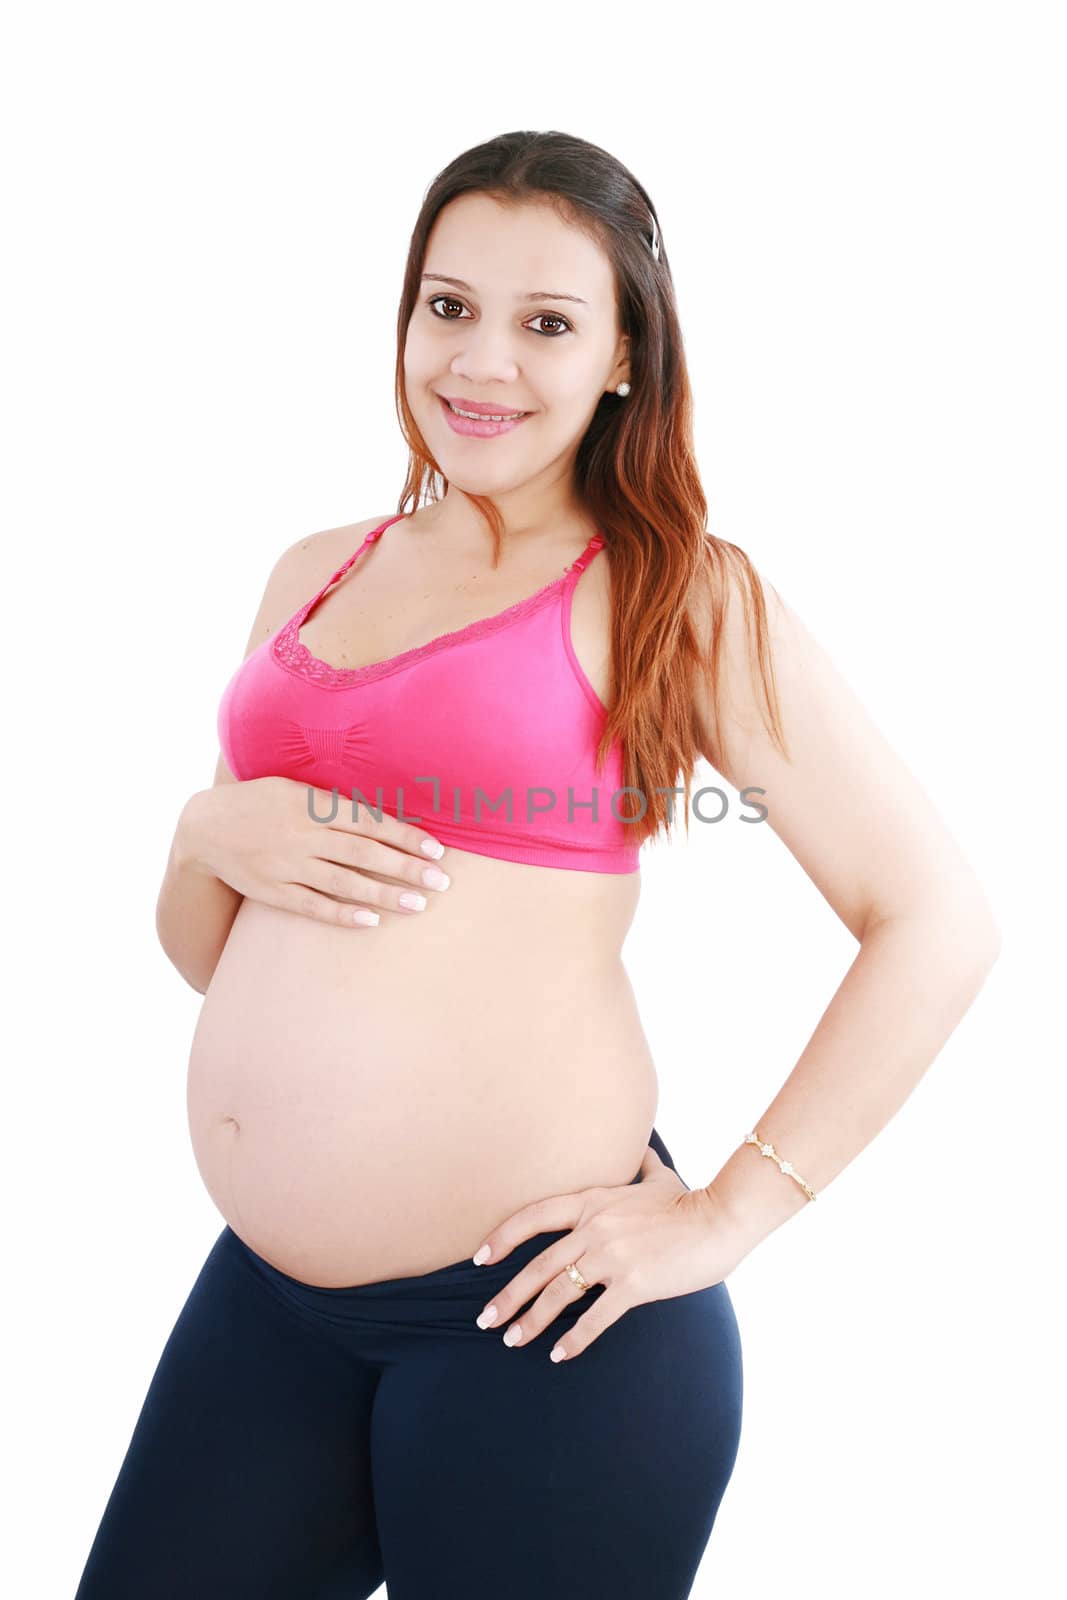 pregnant woman caressing her belly over white background by dacasdo